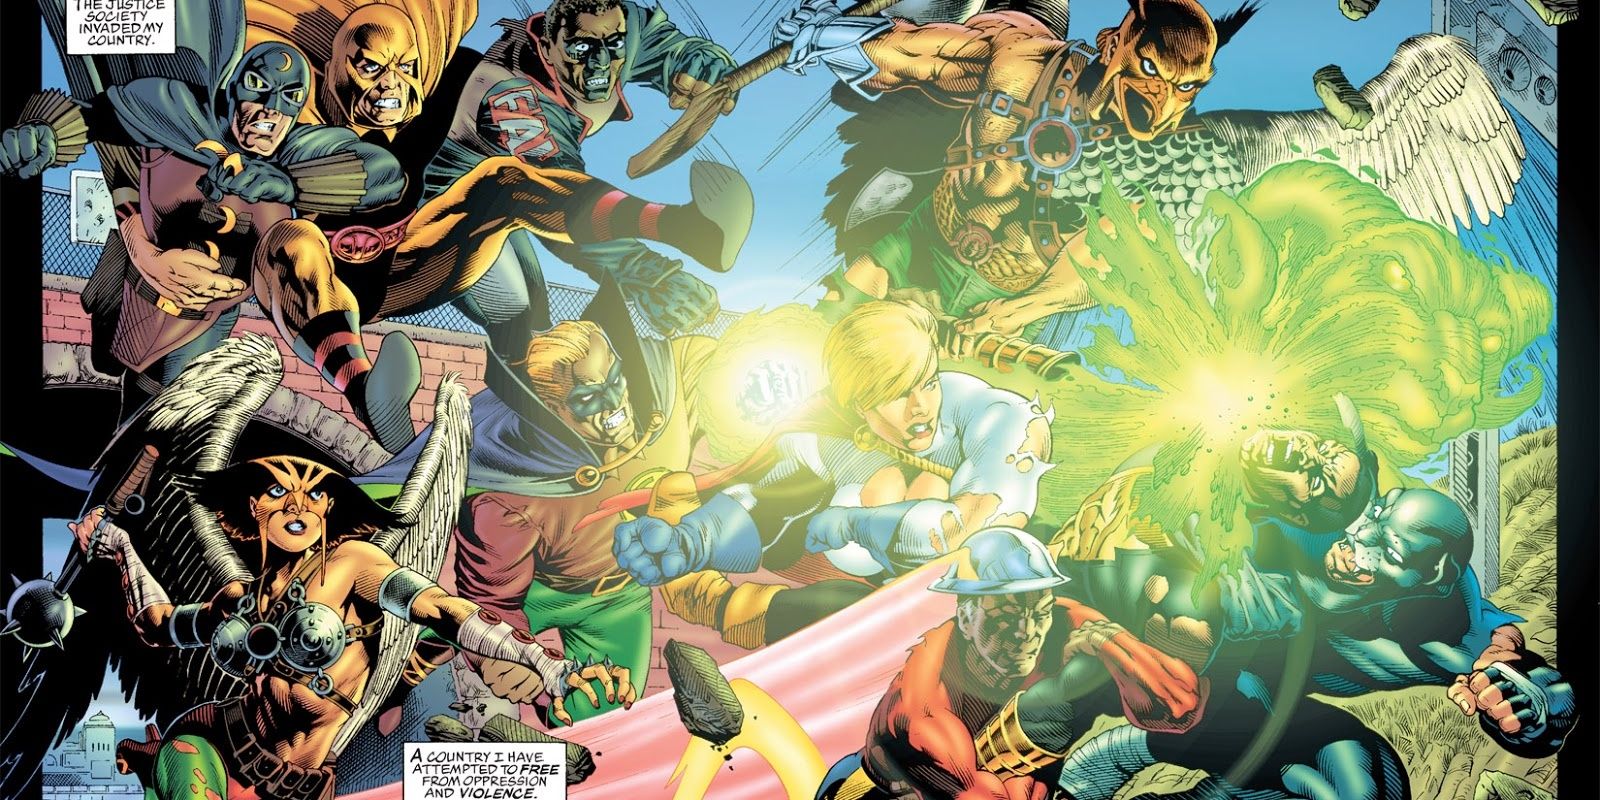 Black Adam Versus the Justice Society from DC Comics